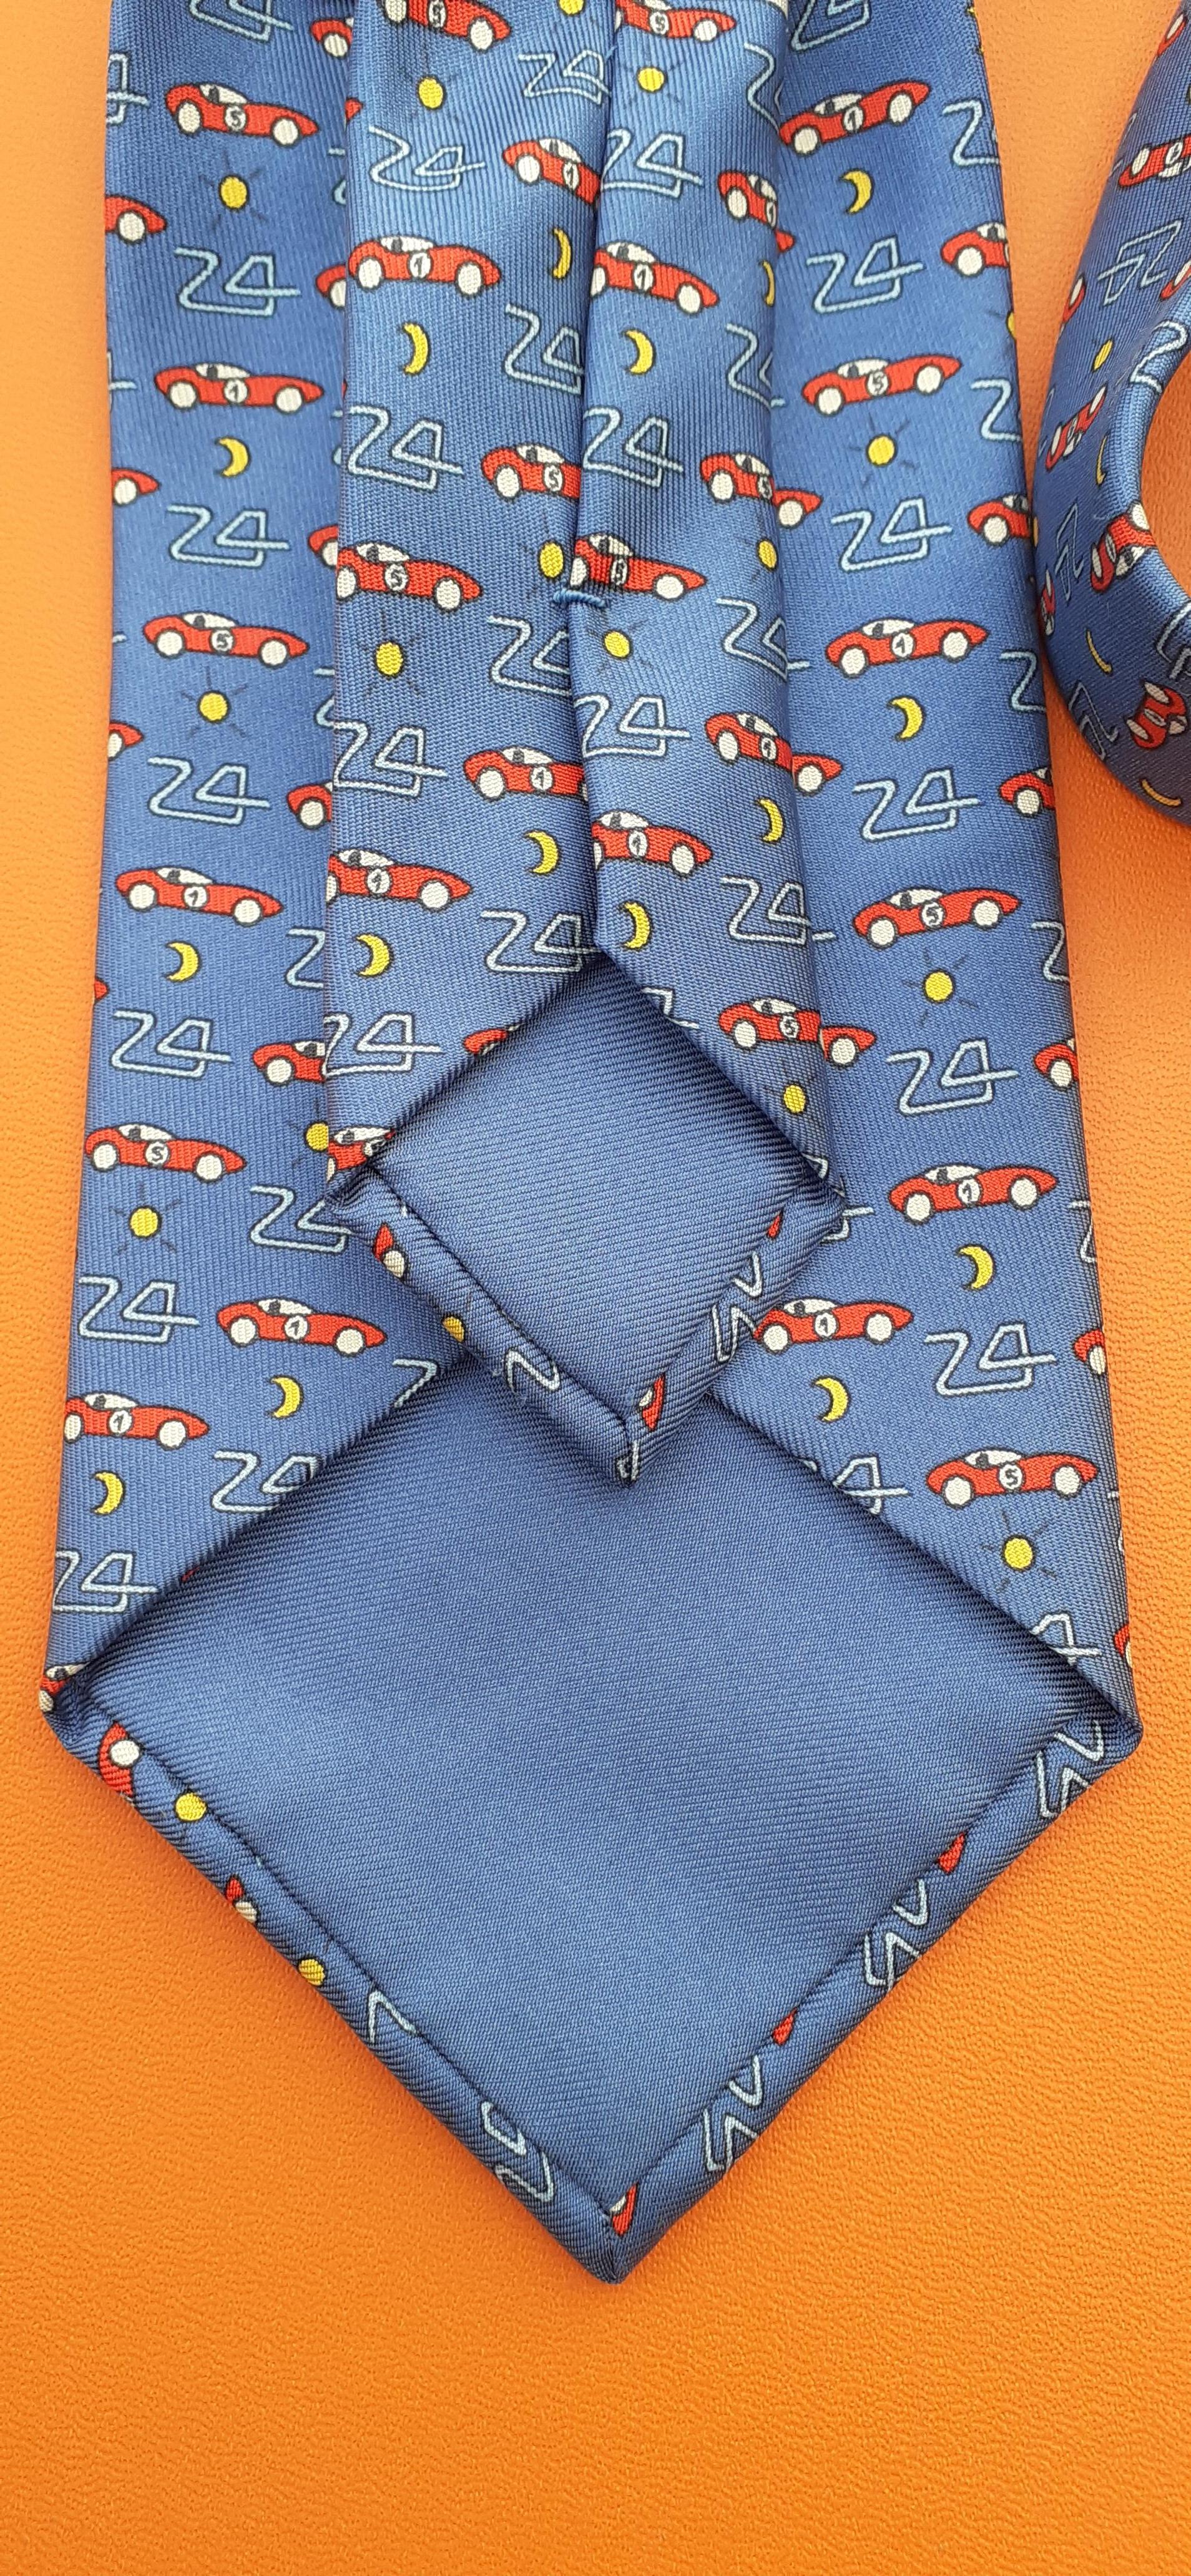 Exceptional Hermès Silk Tie Cars Print For The 24 Hours of Le Mans Race 3